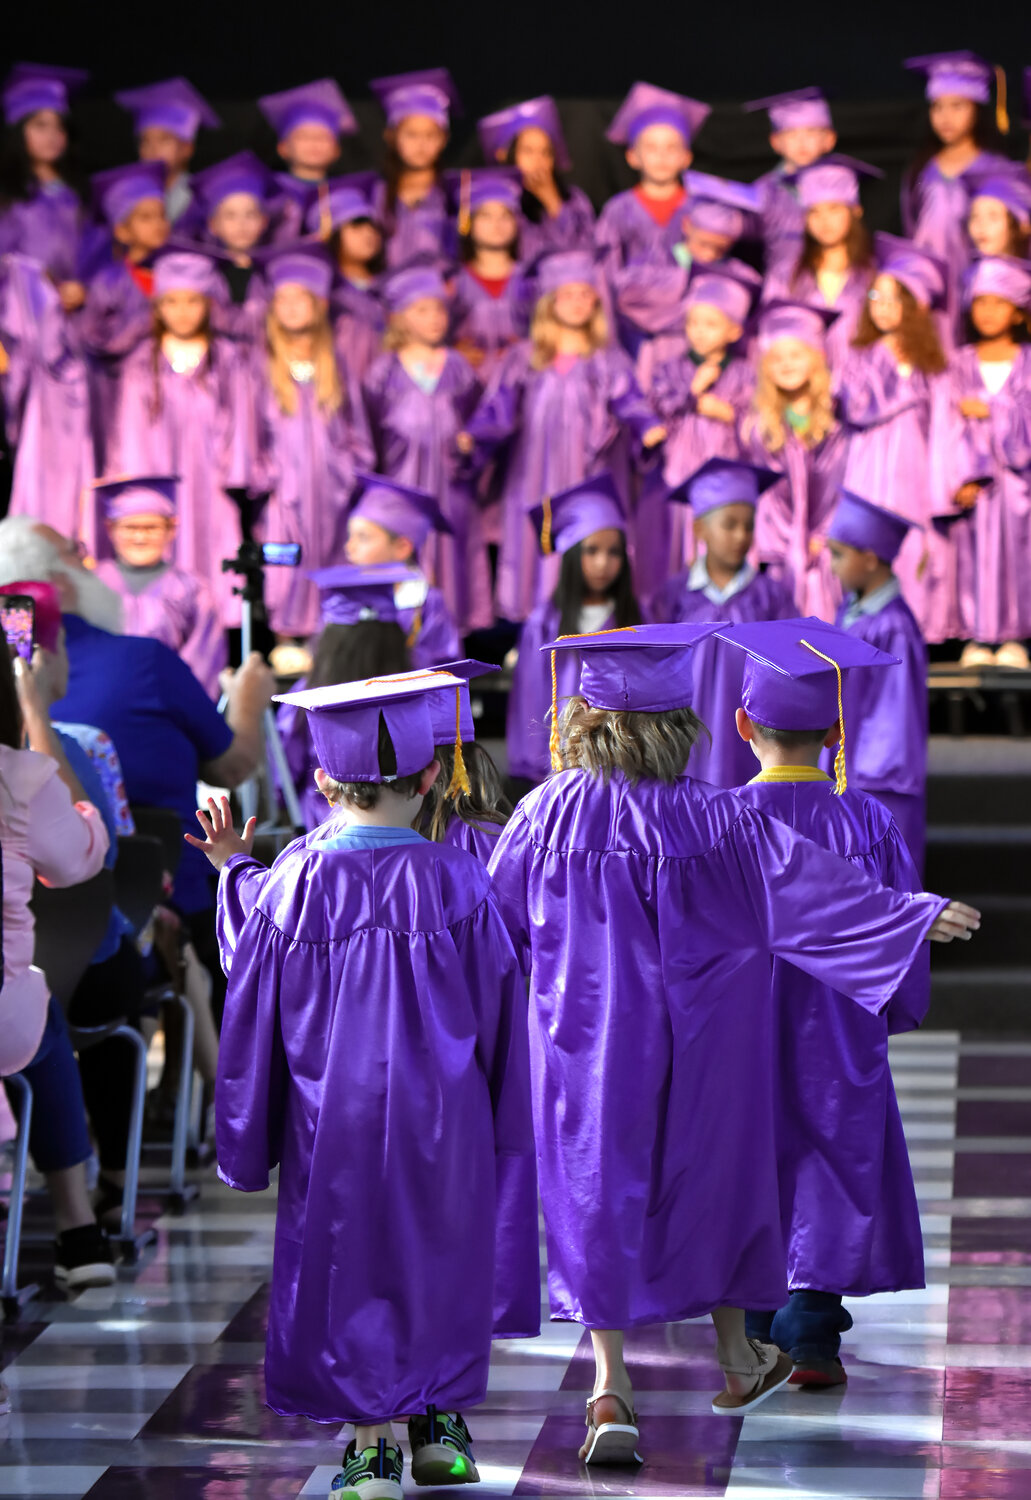 All 69 kindergarten students at Nettie Baccus Elementary School make their way to the stage for the annual graduation ceremony on May 23.